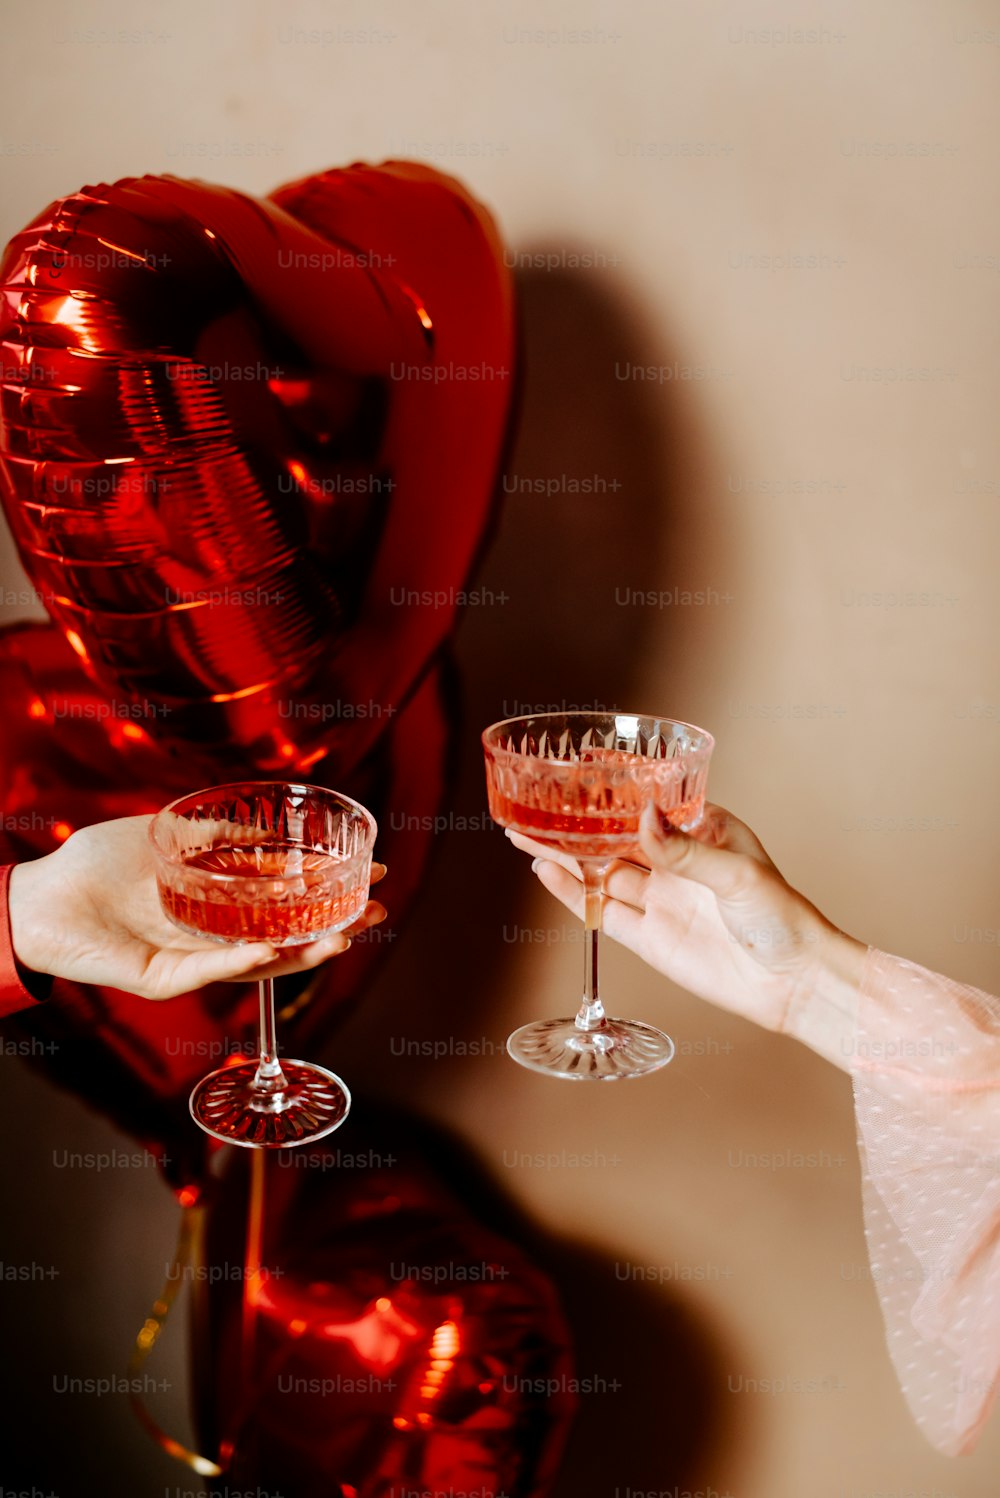 a person holding two glasses of wine in front of balloons